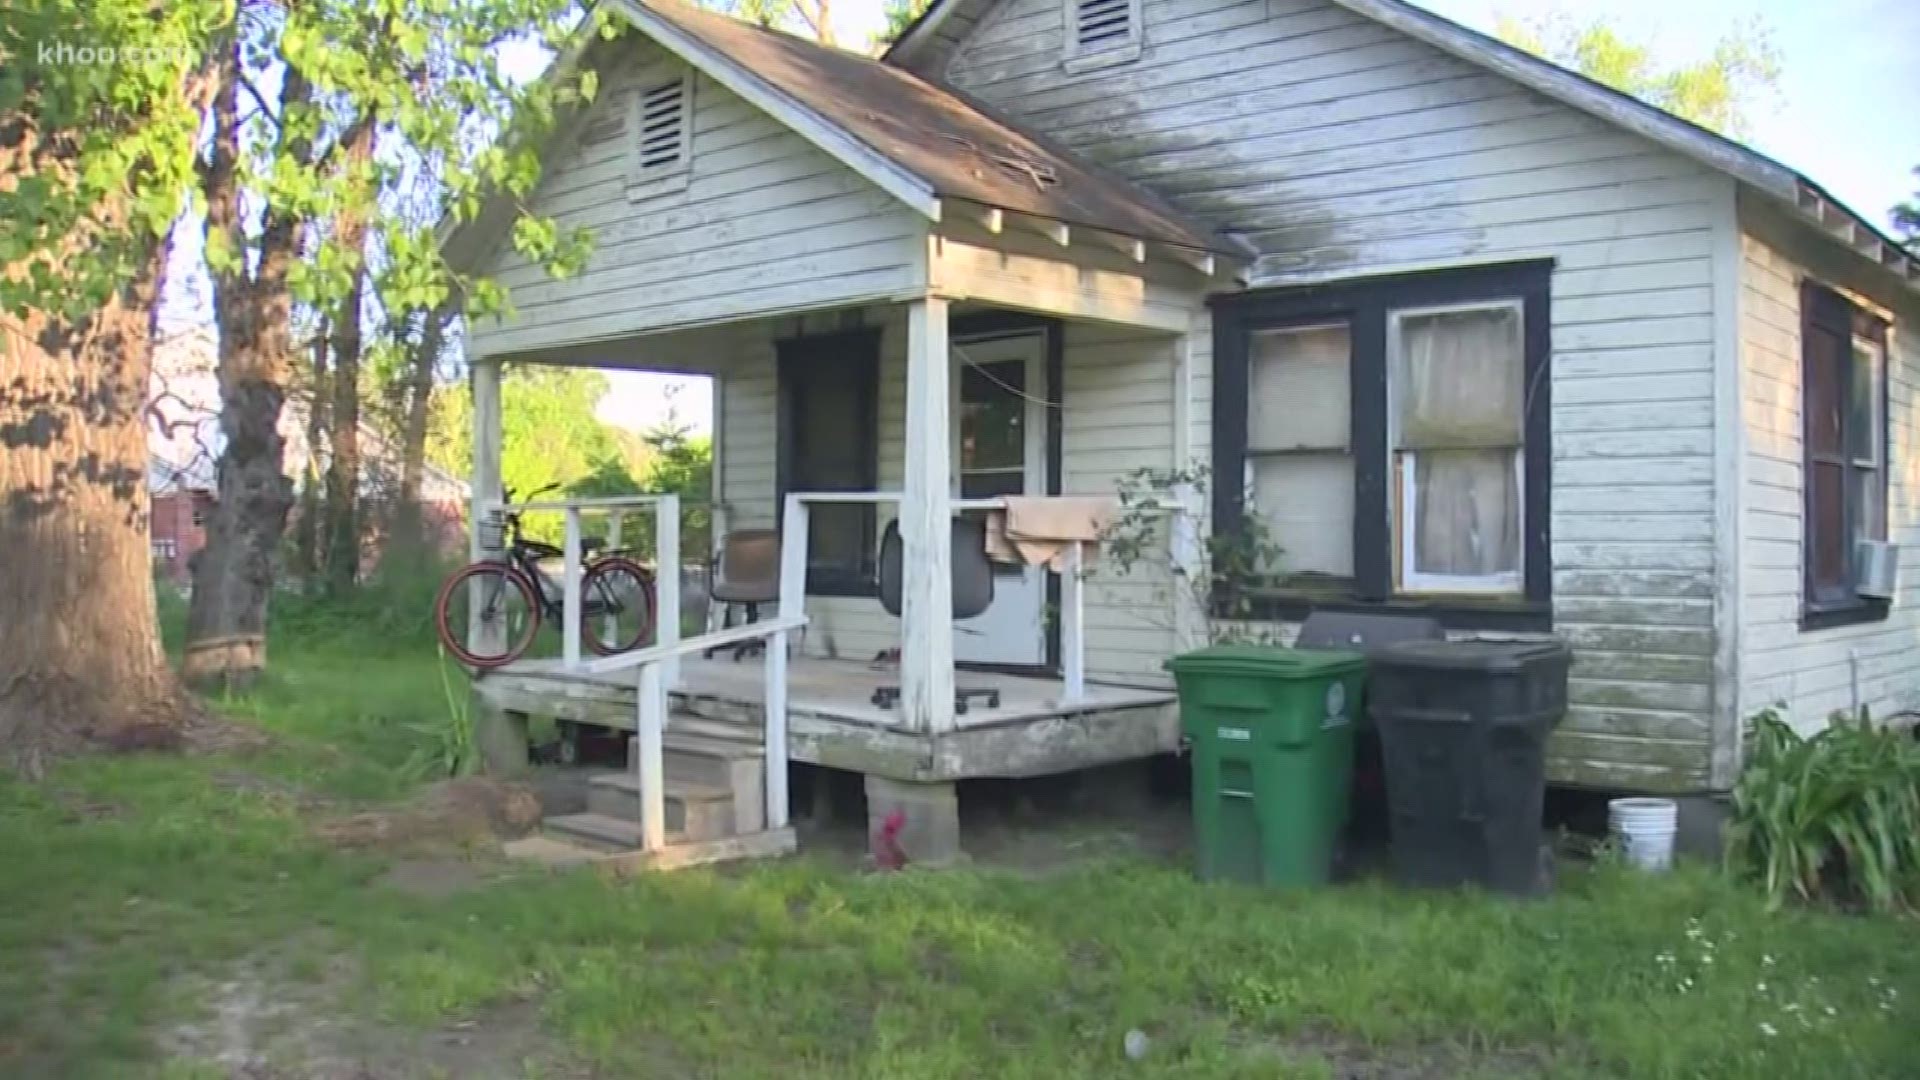 The family of a 70-year-old woman is frustrated and angry after they say she's being evicted from a home she inherited from her mother.